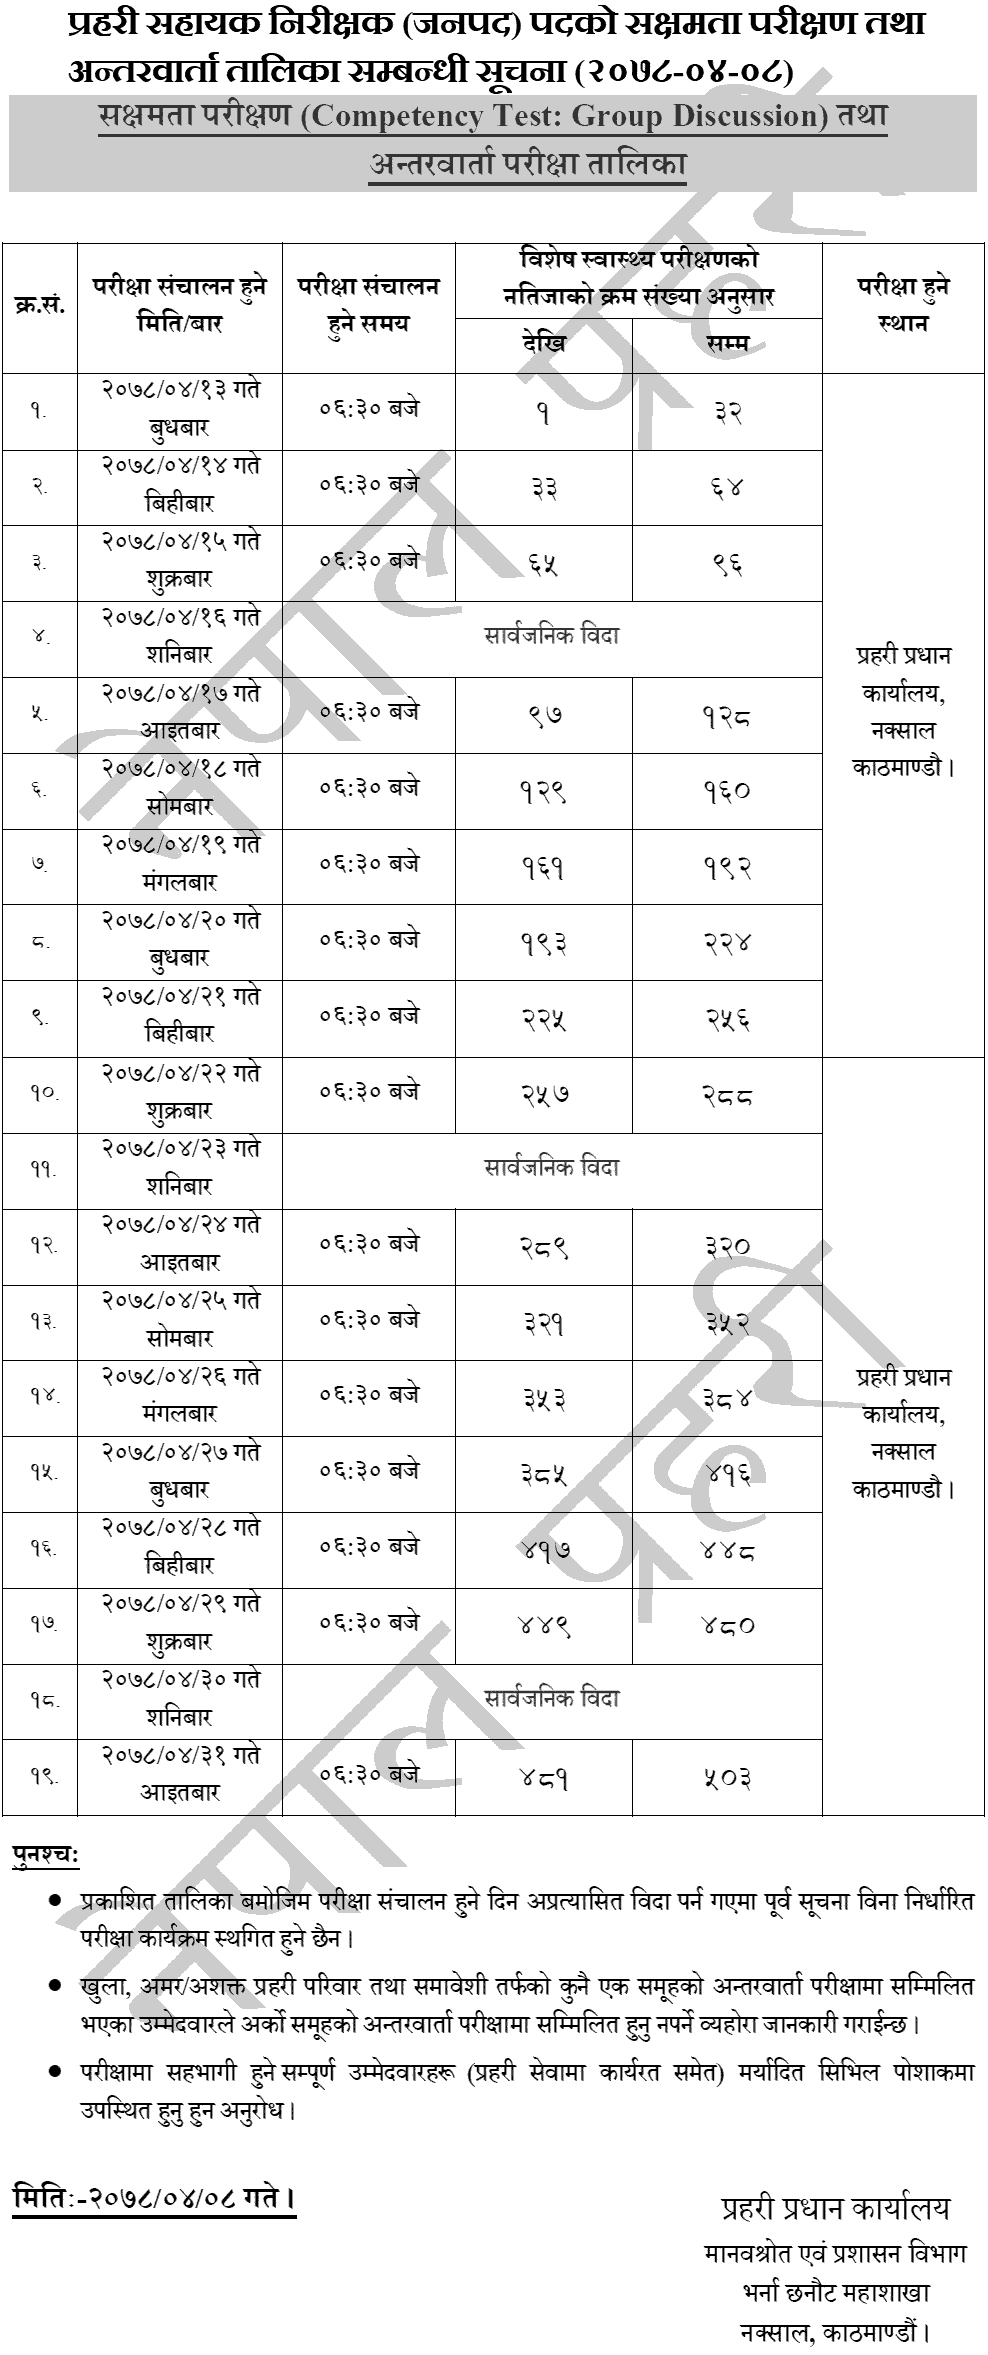 Nepal Police Janapad ASI Result of Special Health Examination and Schedule of Competency Test